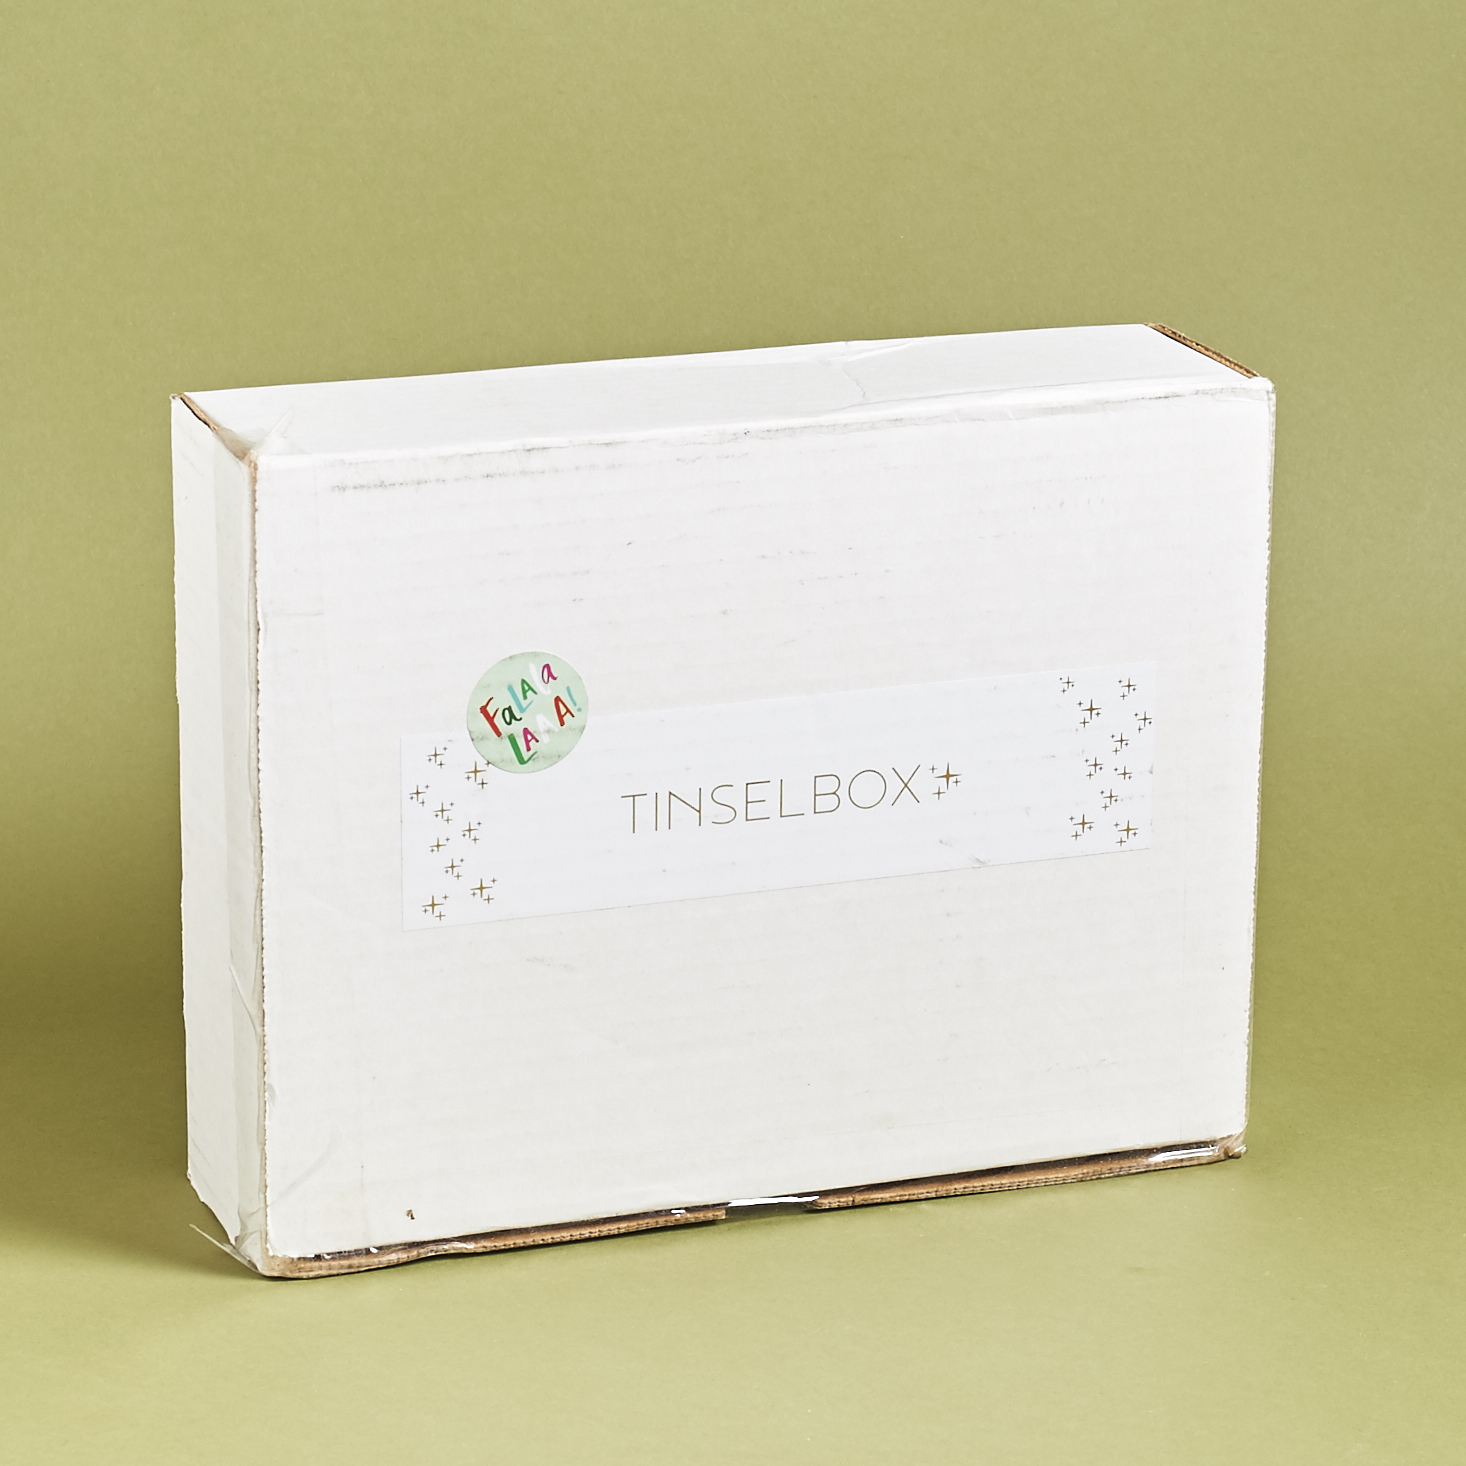 Read our review to see what's inside the Christmas 2016 TinselBox!